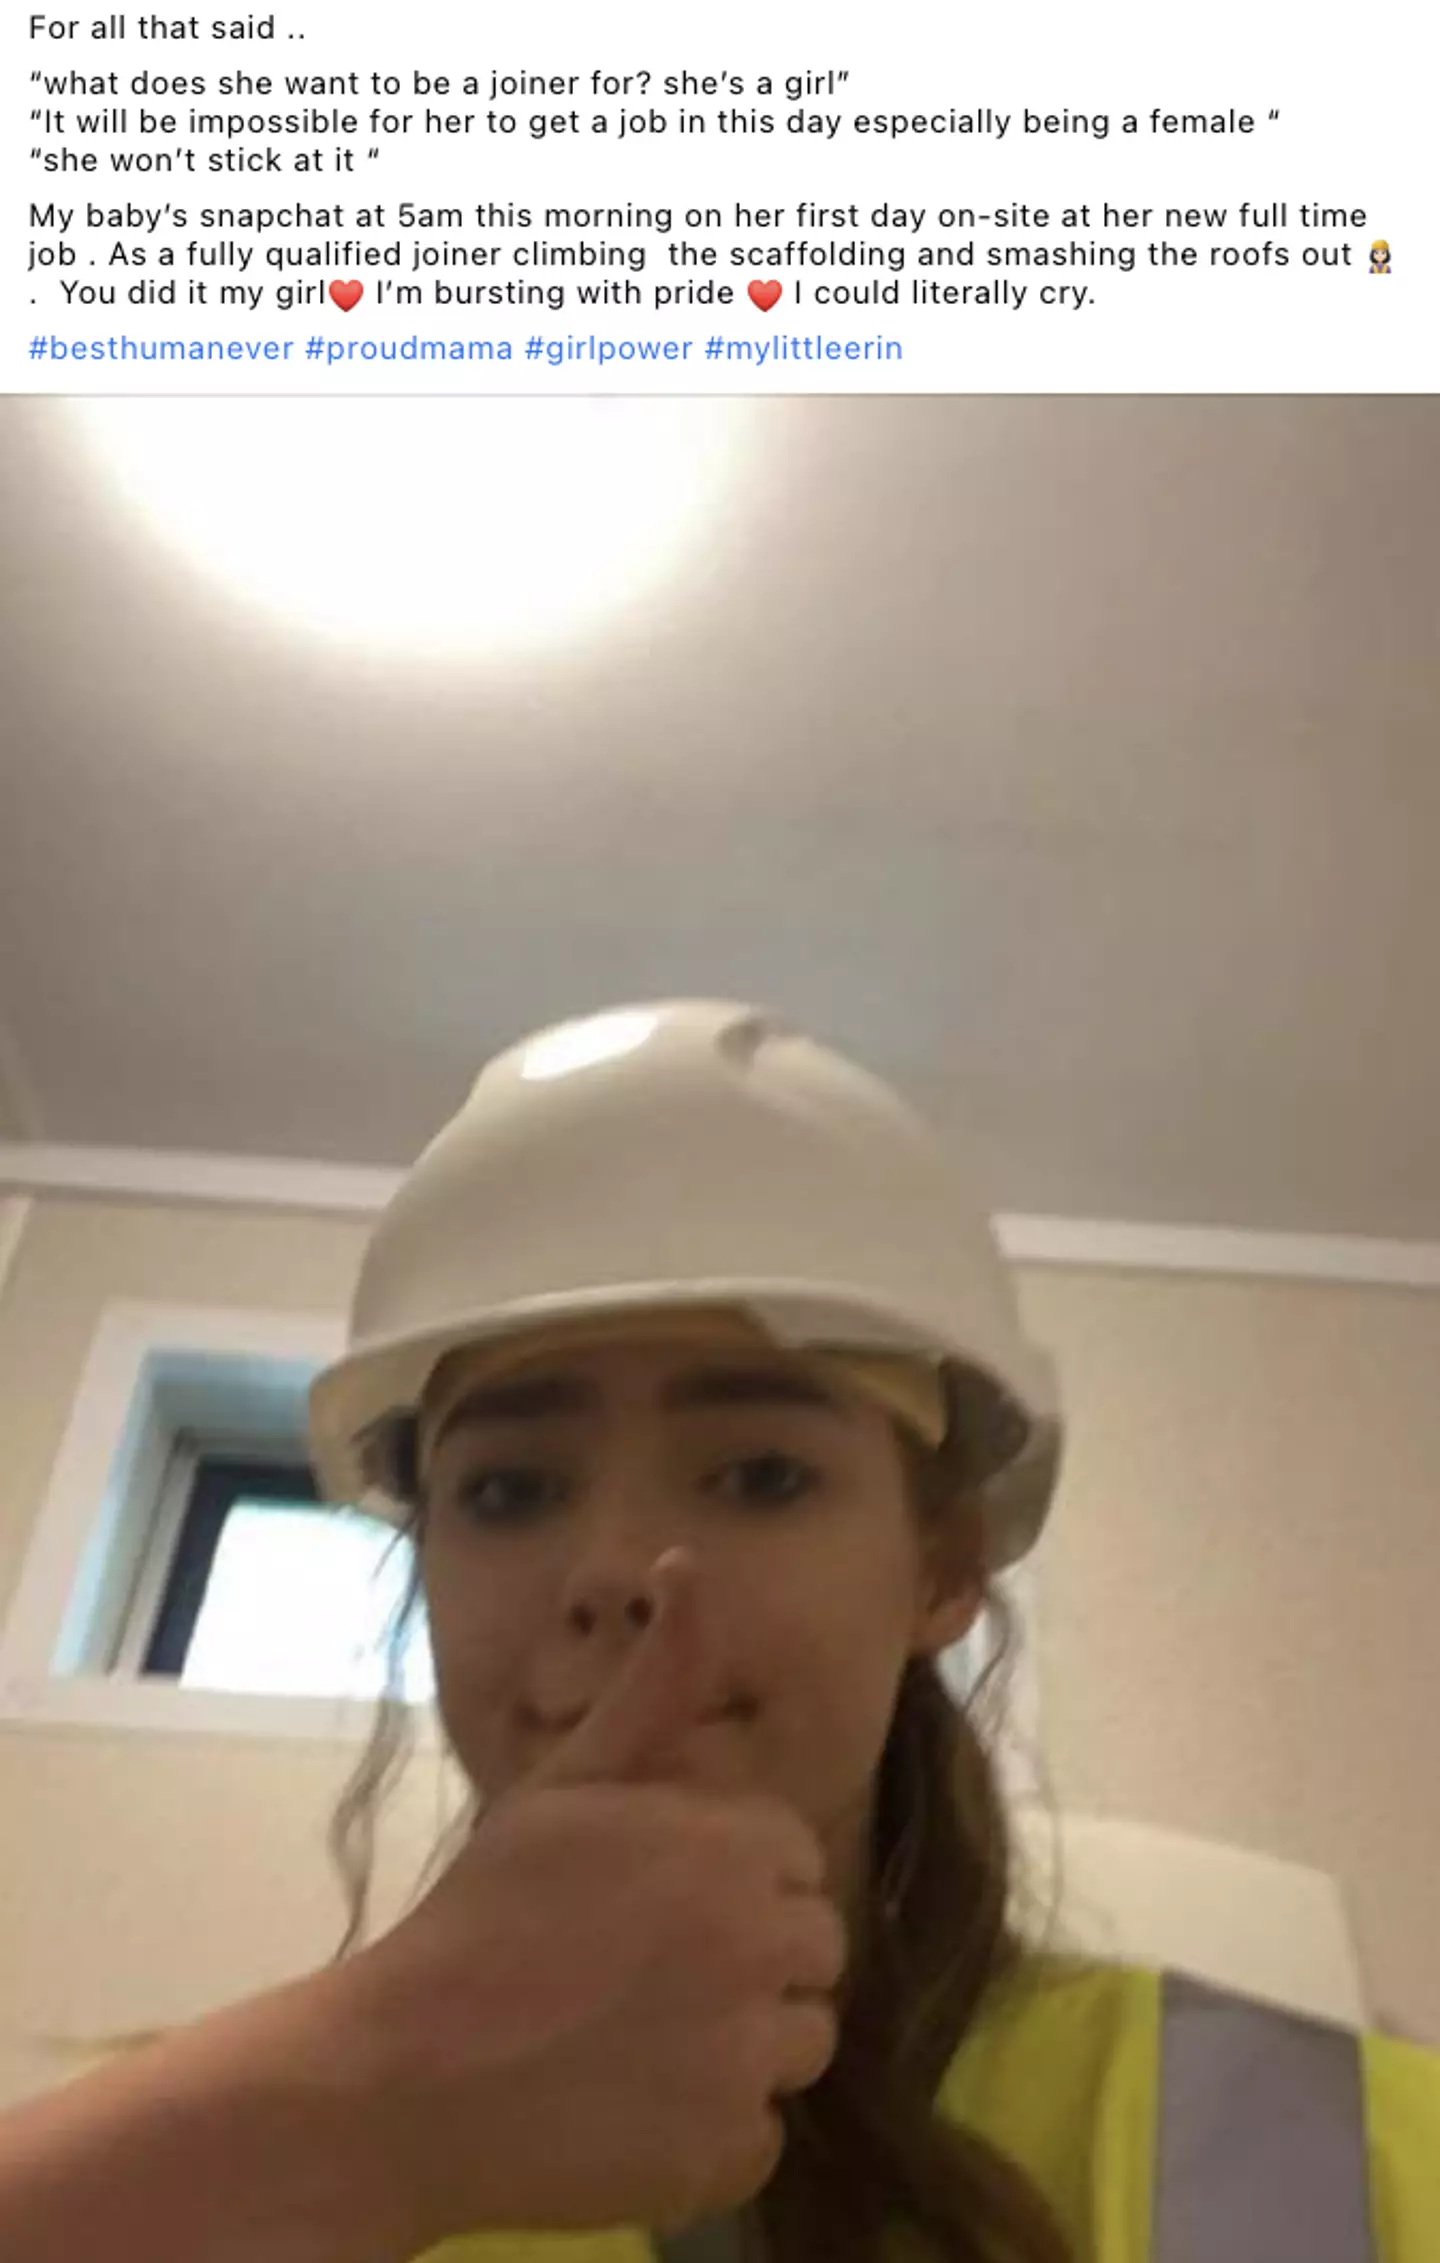 The woman shared an image of her daughter on her first day on-site (